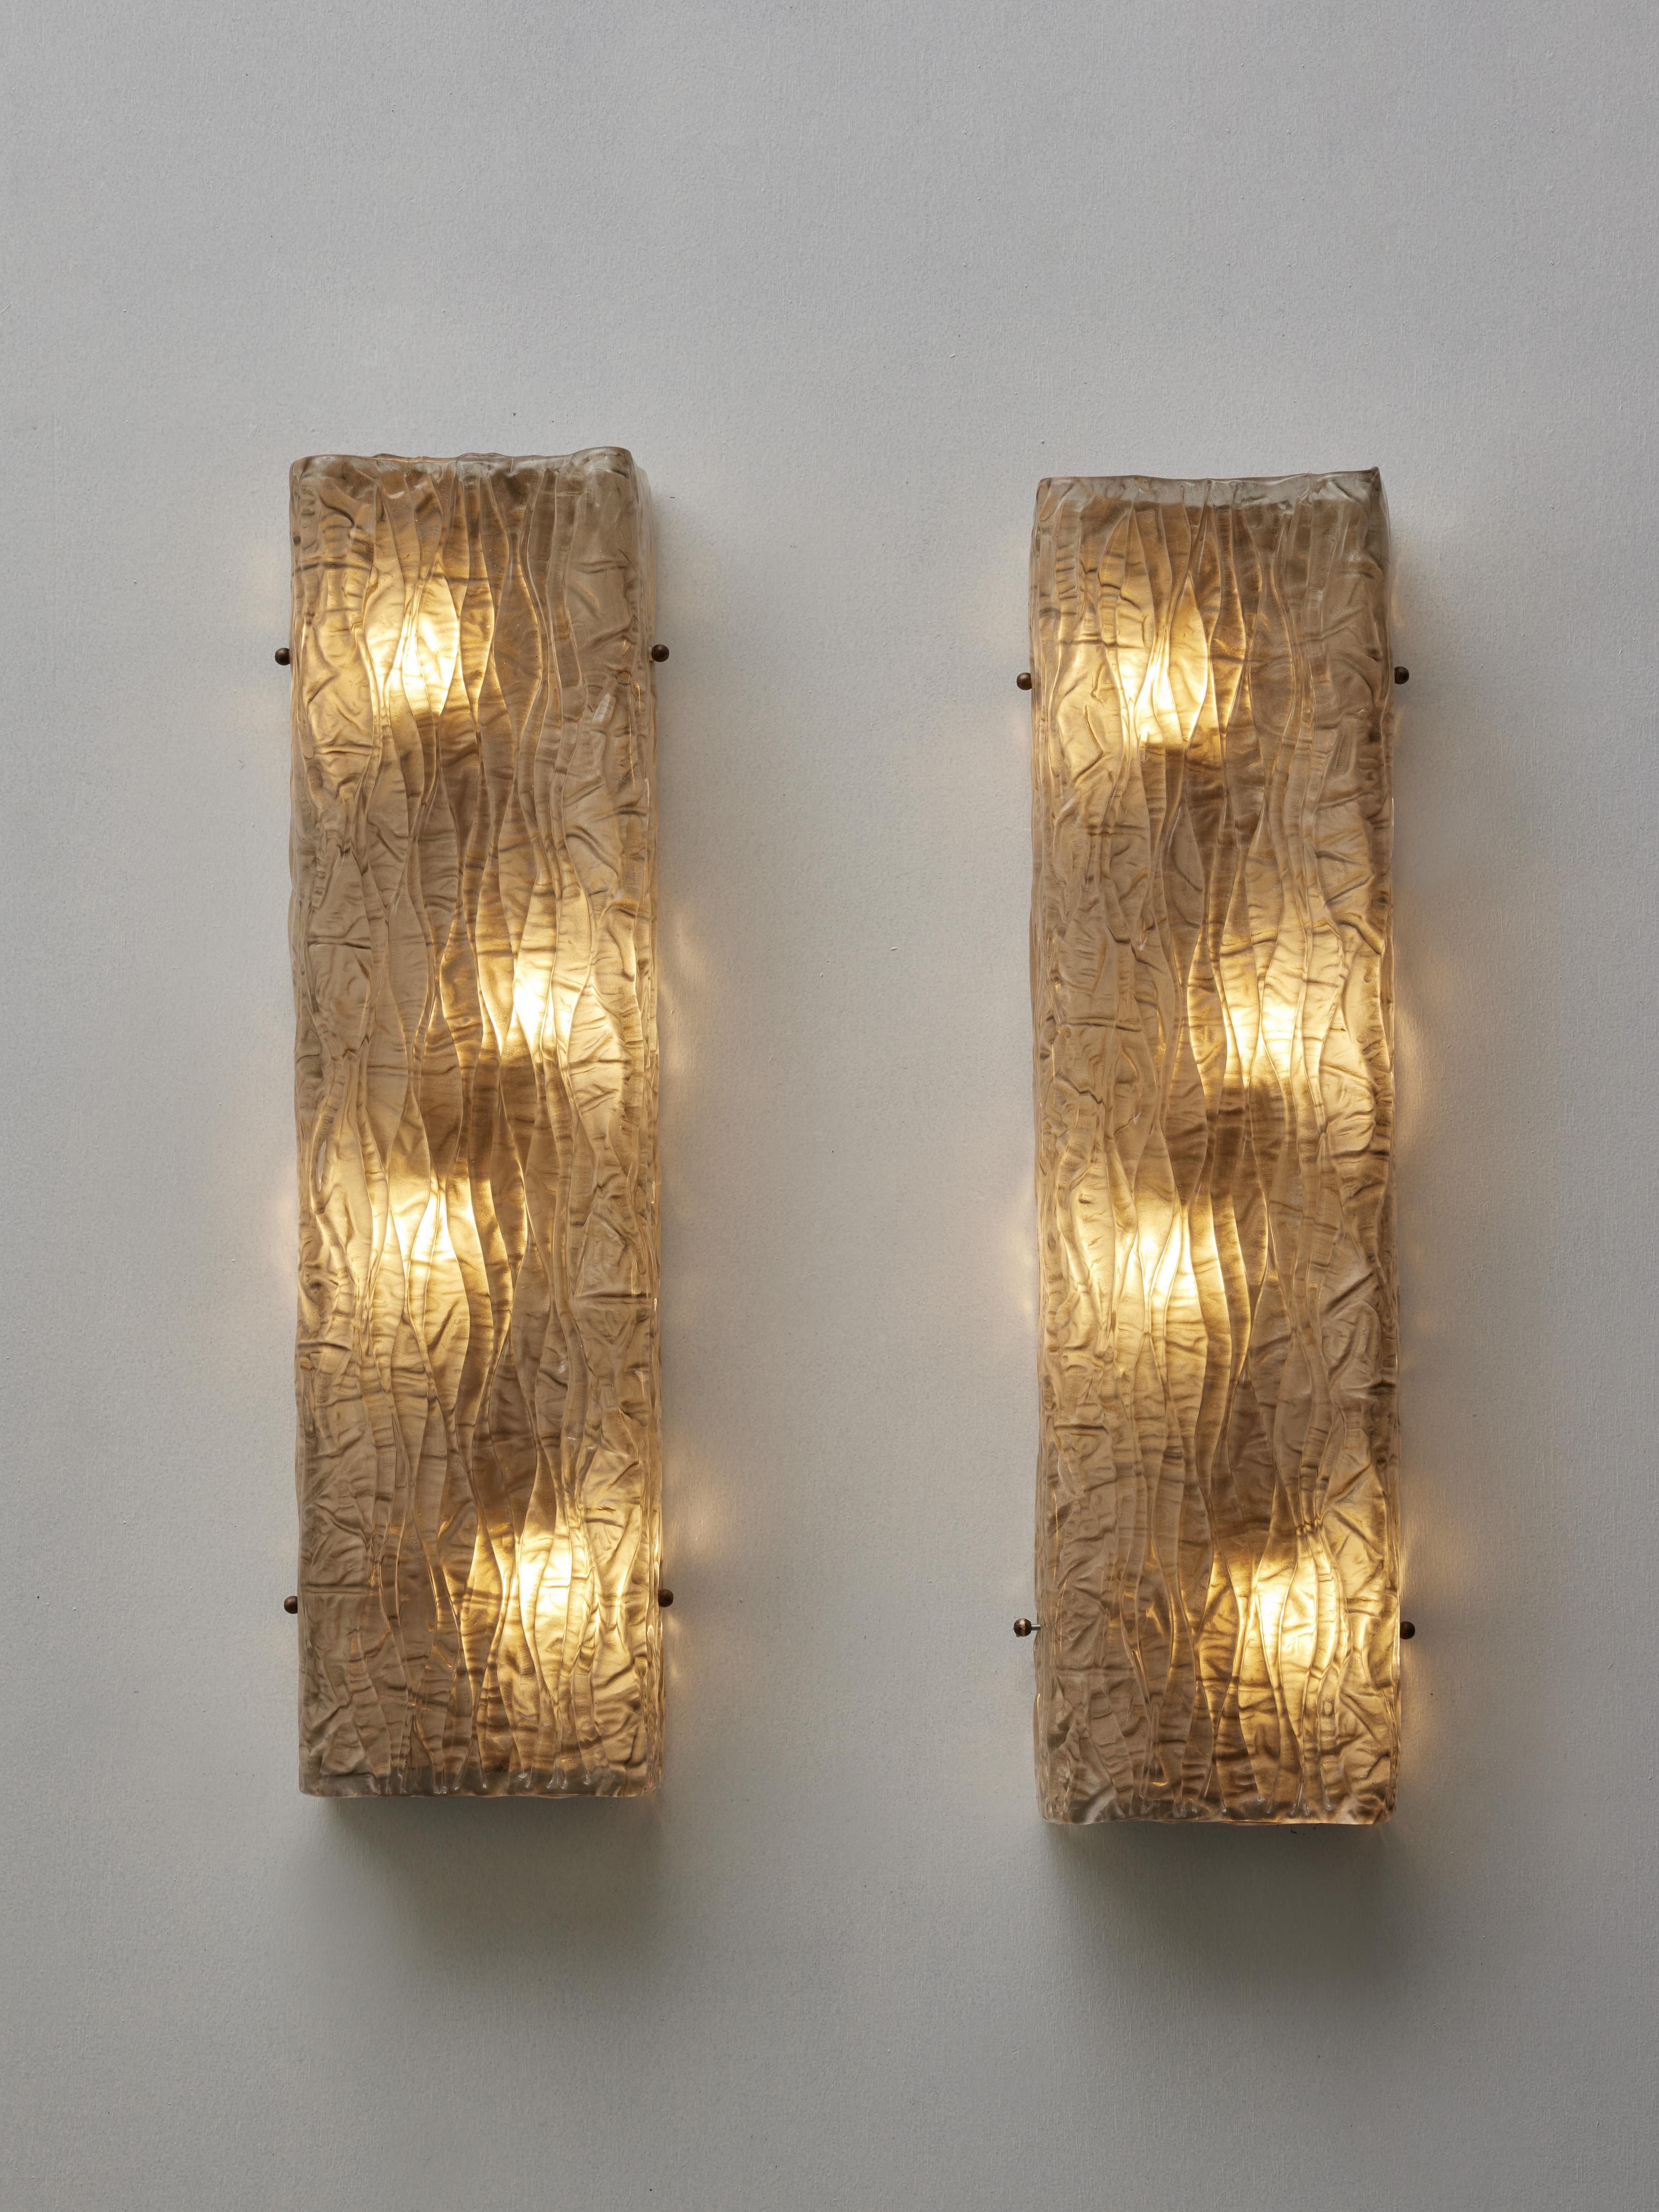 Pair of sconces in sculpted Murano glass
Creation by Studio Glustin.